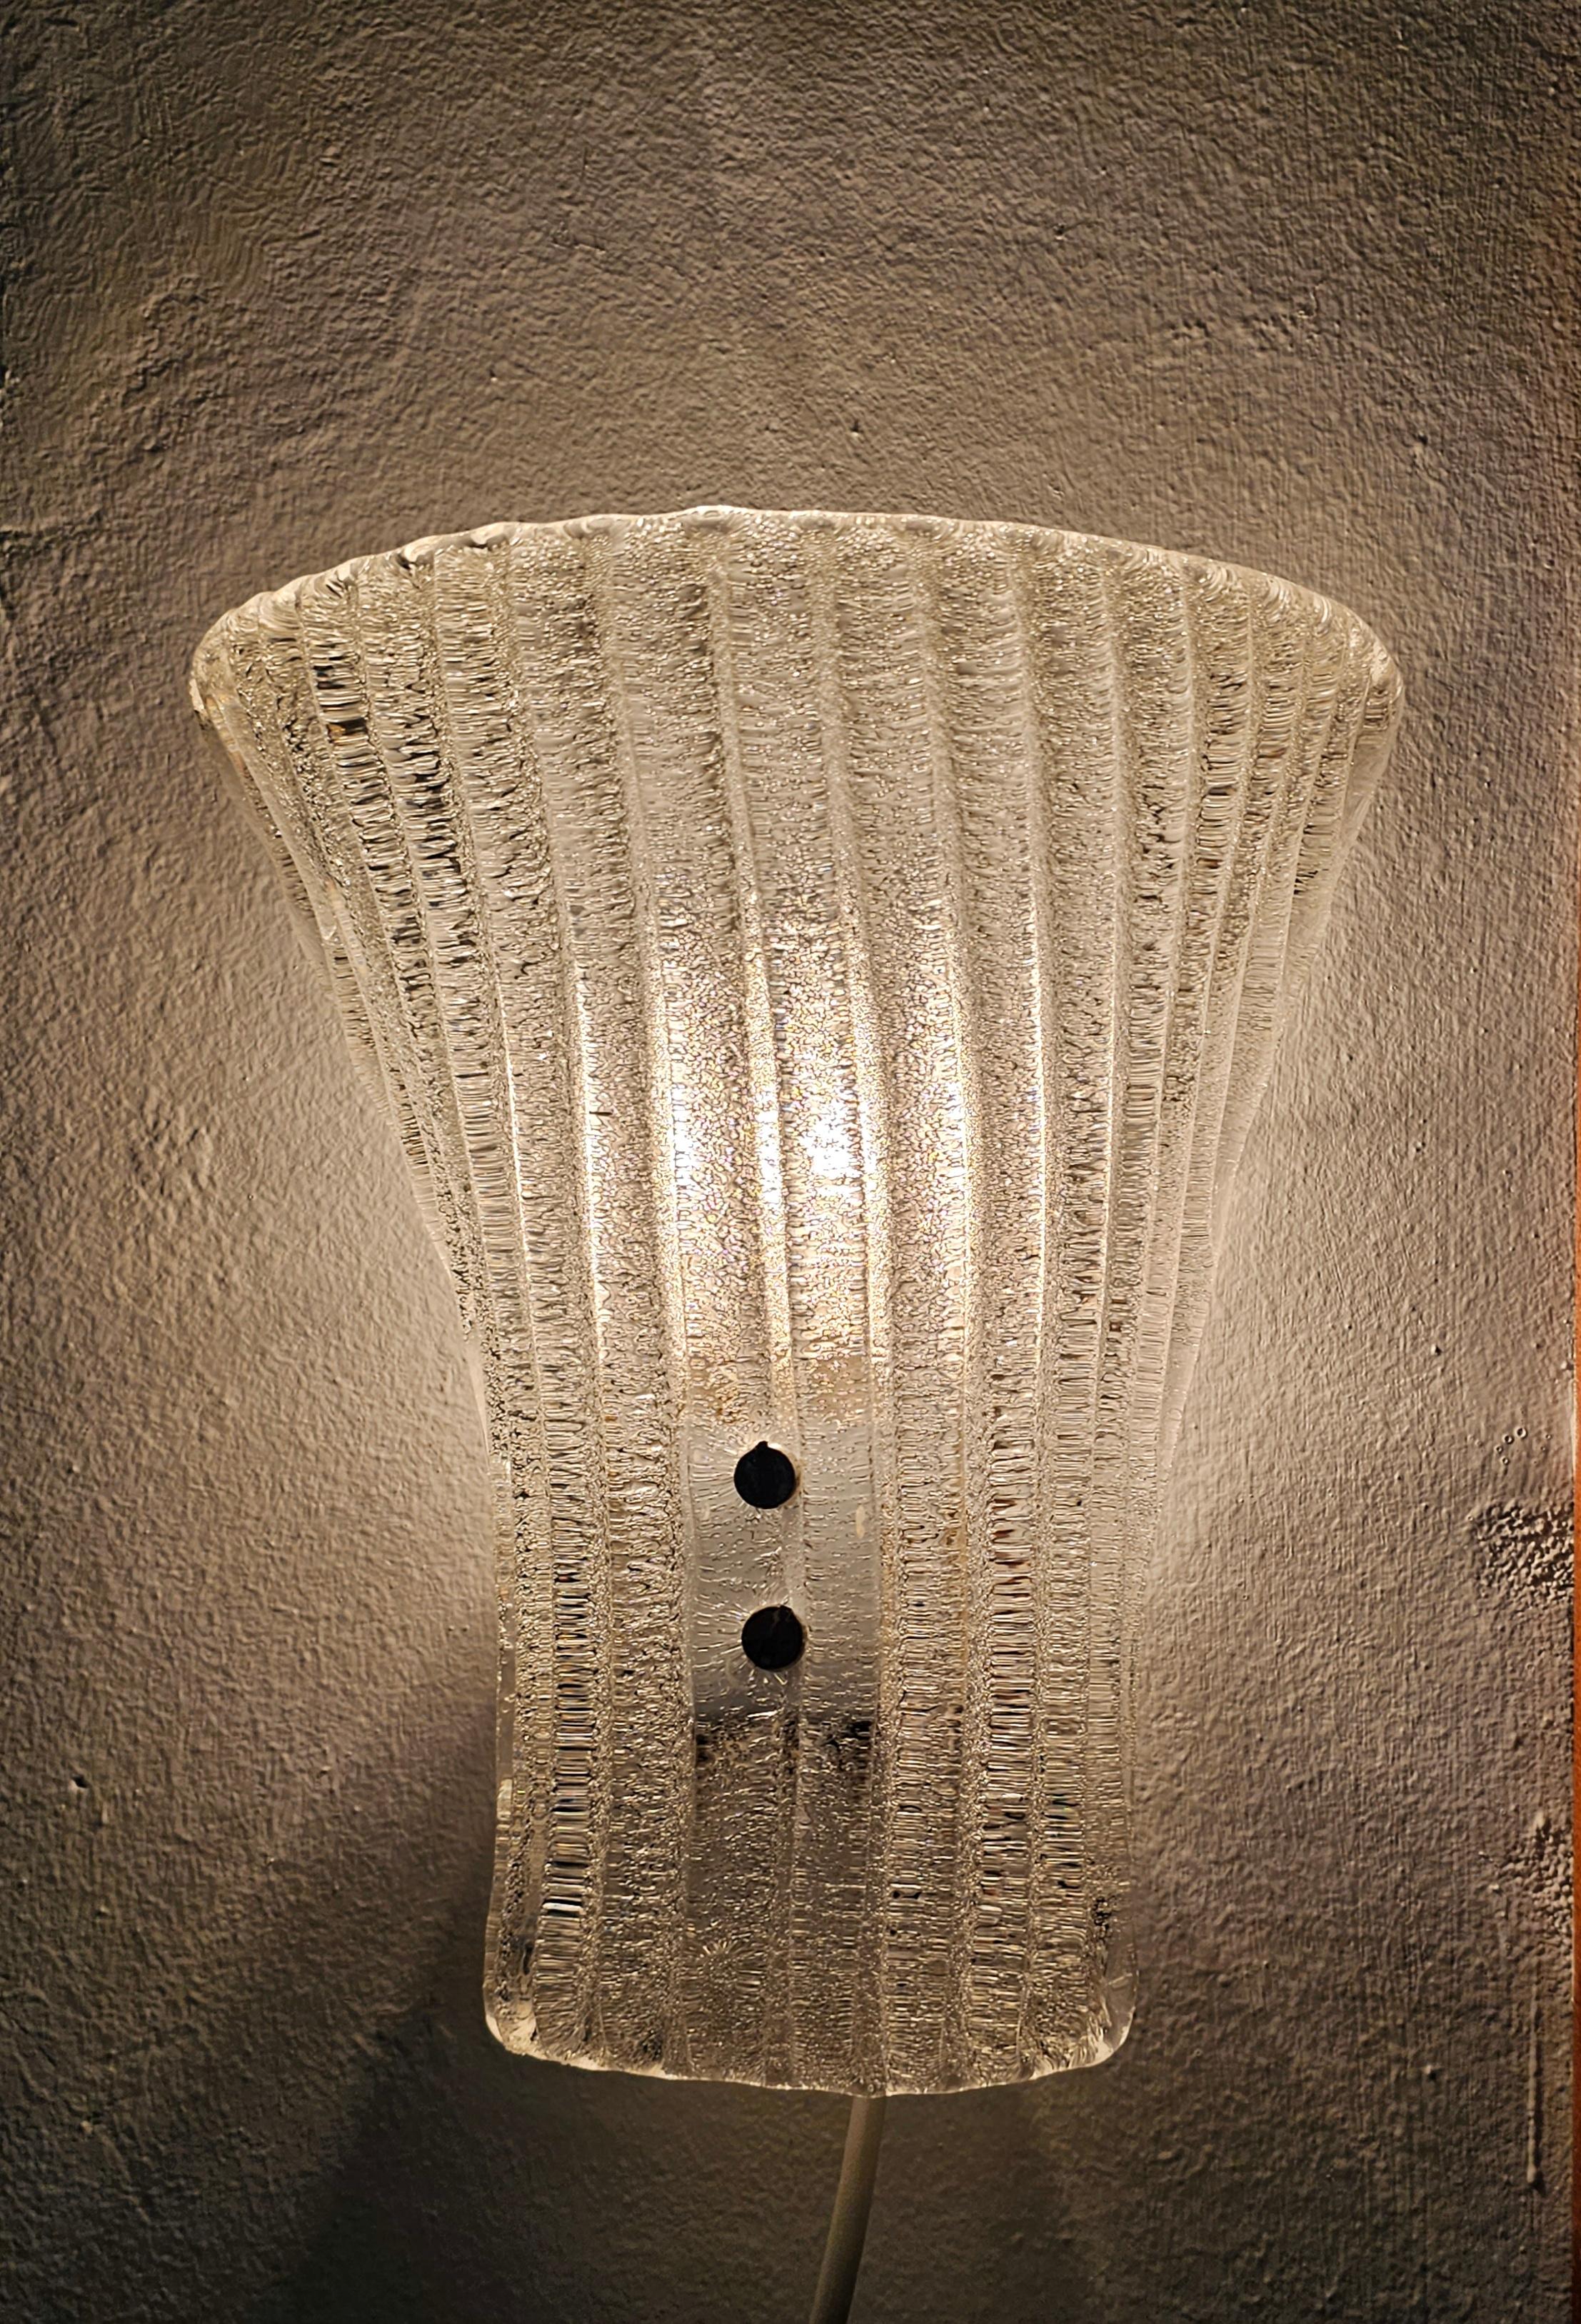 In this listing you will find a pair of rare Mid Century Modern Murano Glass Sconces designed by Barovier and Toso. They feature frosty, textured glass shades, curved towards the top. Each sconces requires a single E14 light bulb, available